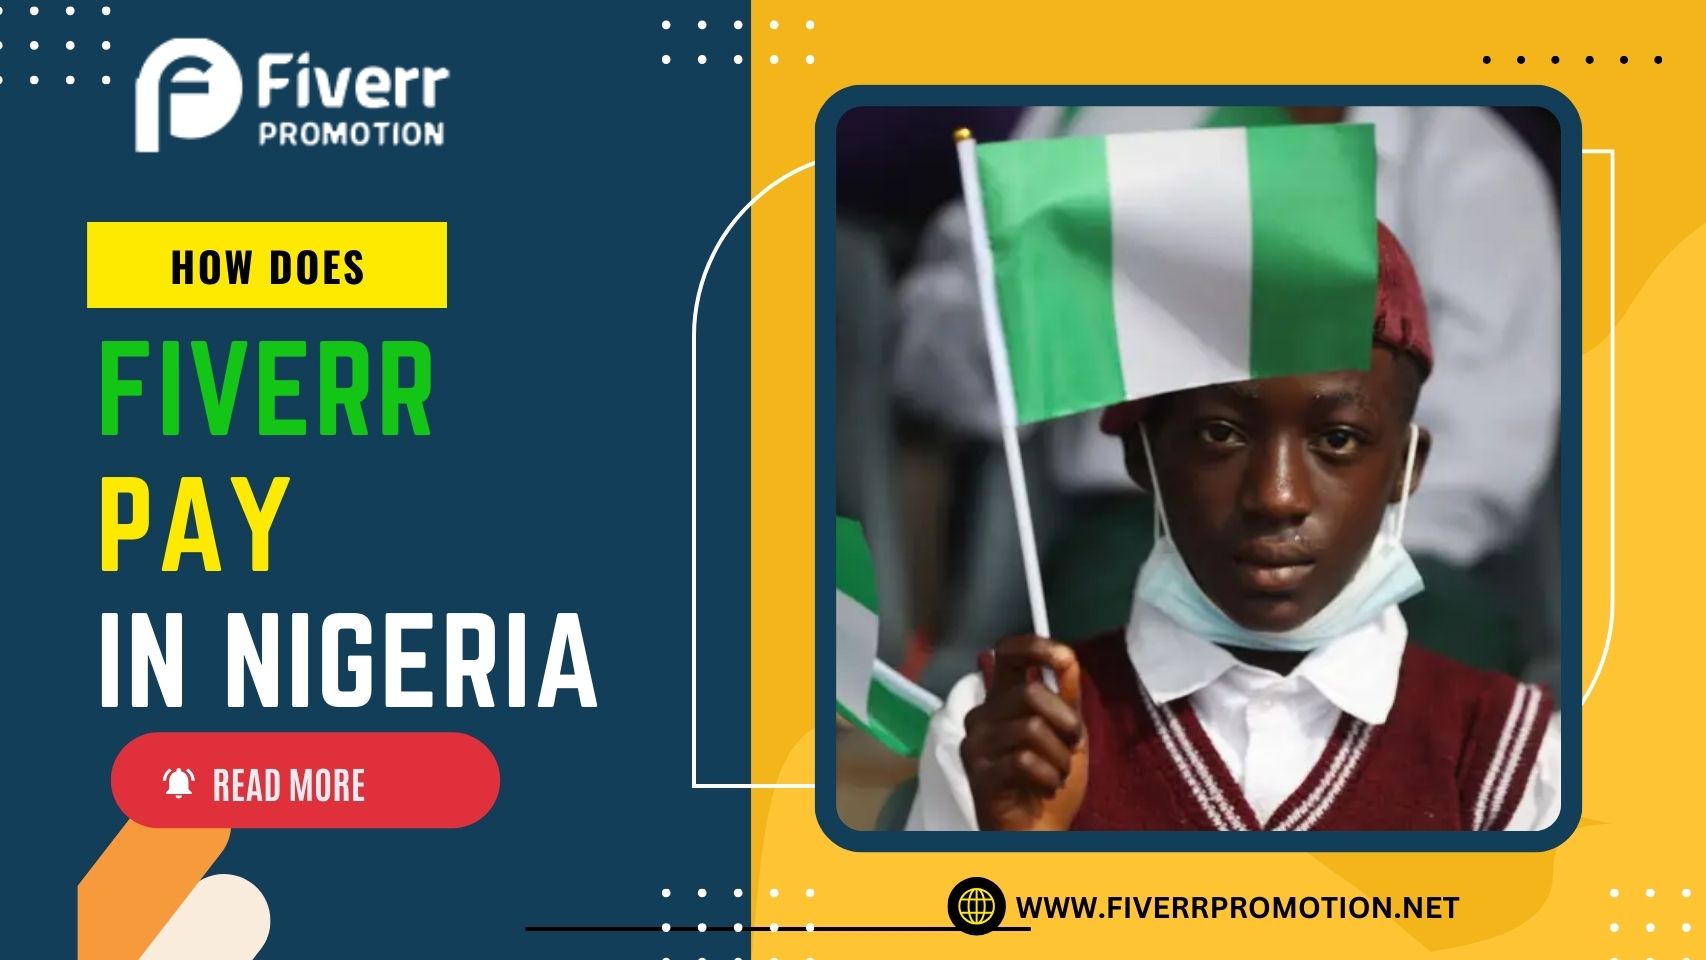 How Does Fiverr Pay in Nigeria